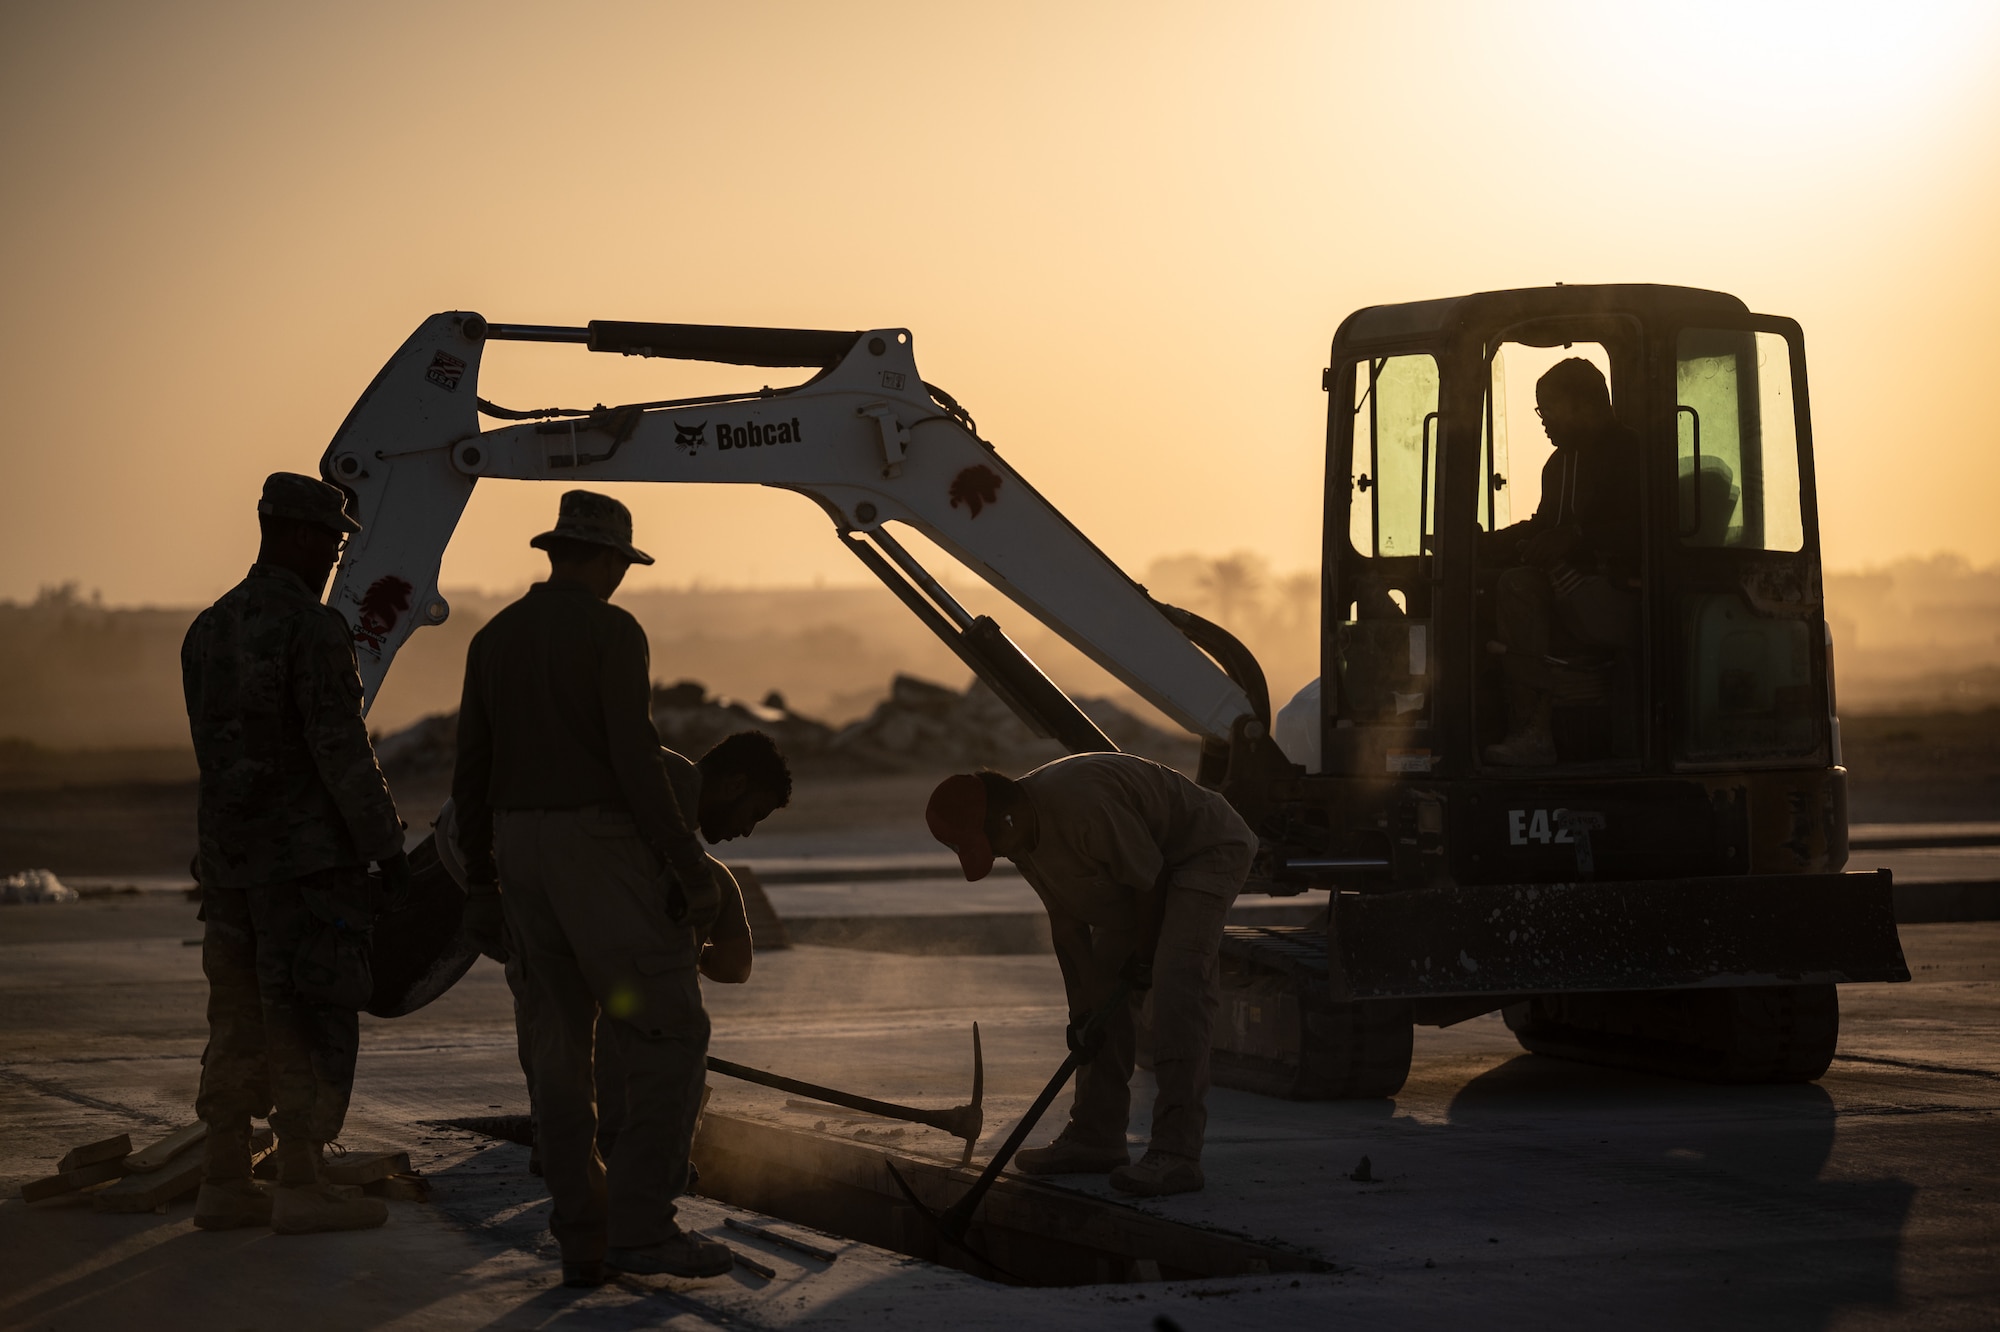 1st Expeditionary Civil Engineer Group Airmen remove wood forms used for airfield lighting placement during a runway overrun repair project at an undisclosed location in Southwest Asia, June 8, 2022. The runway extension, or overrun, will better accommodate aircraft take-off and landing operations and provide extended mission capabilities for the 332d AEW by replacing the non-load-bearing surface and providing improved capabilities in the event of an emergency takeoff or landing. (U.S. Air Force by Master Sgt. Christopher Parr)